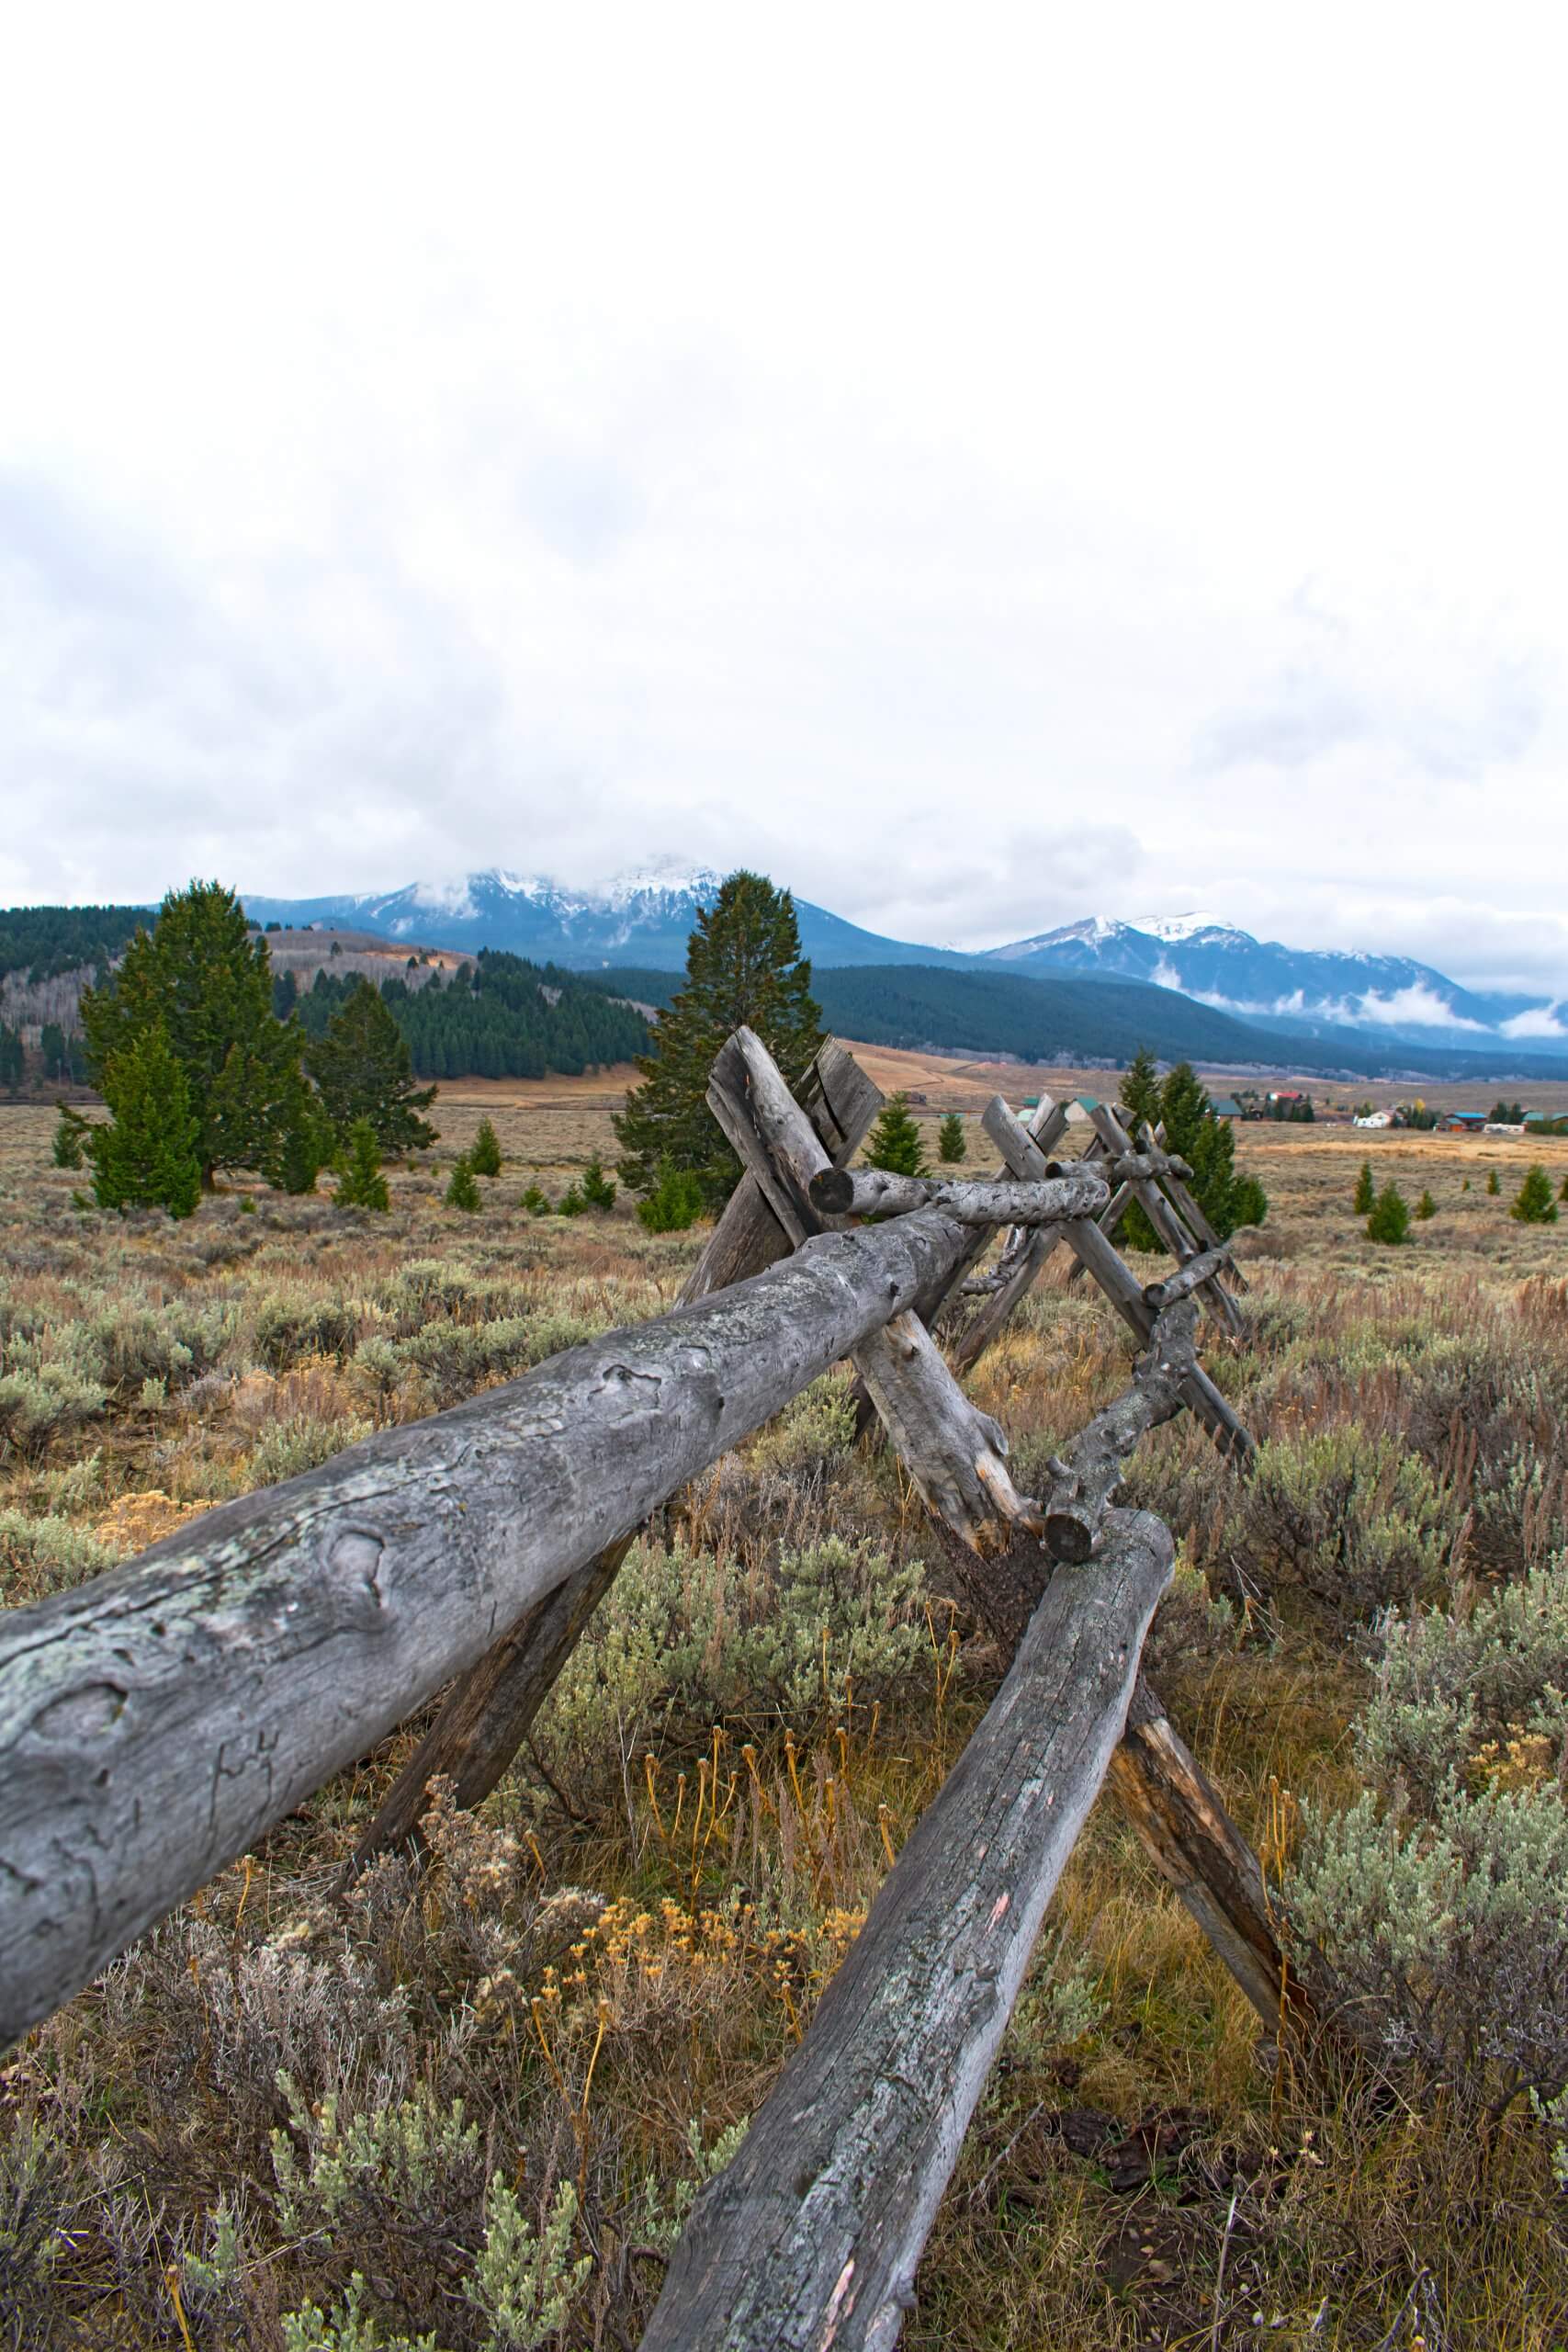 Wooden fence at Henrys Lake State Park with snow-capped mountains in the distance.